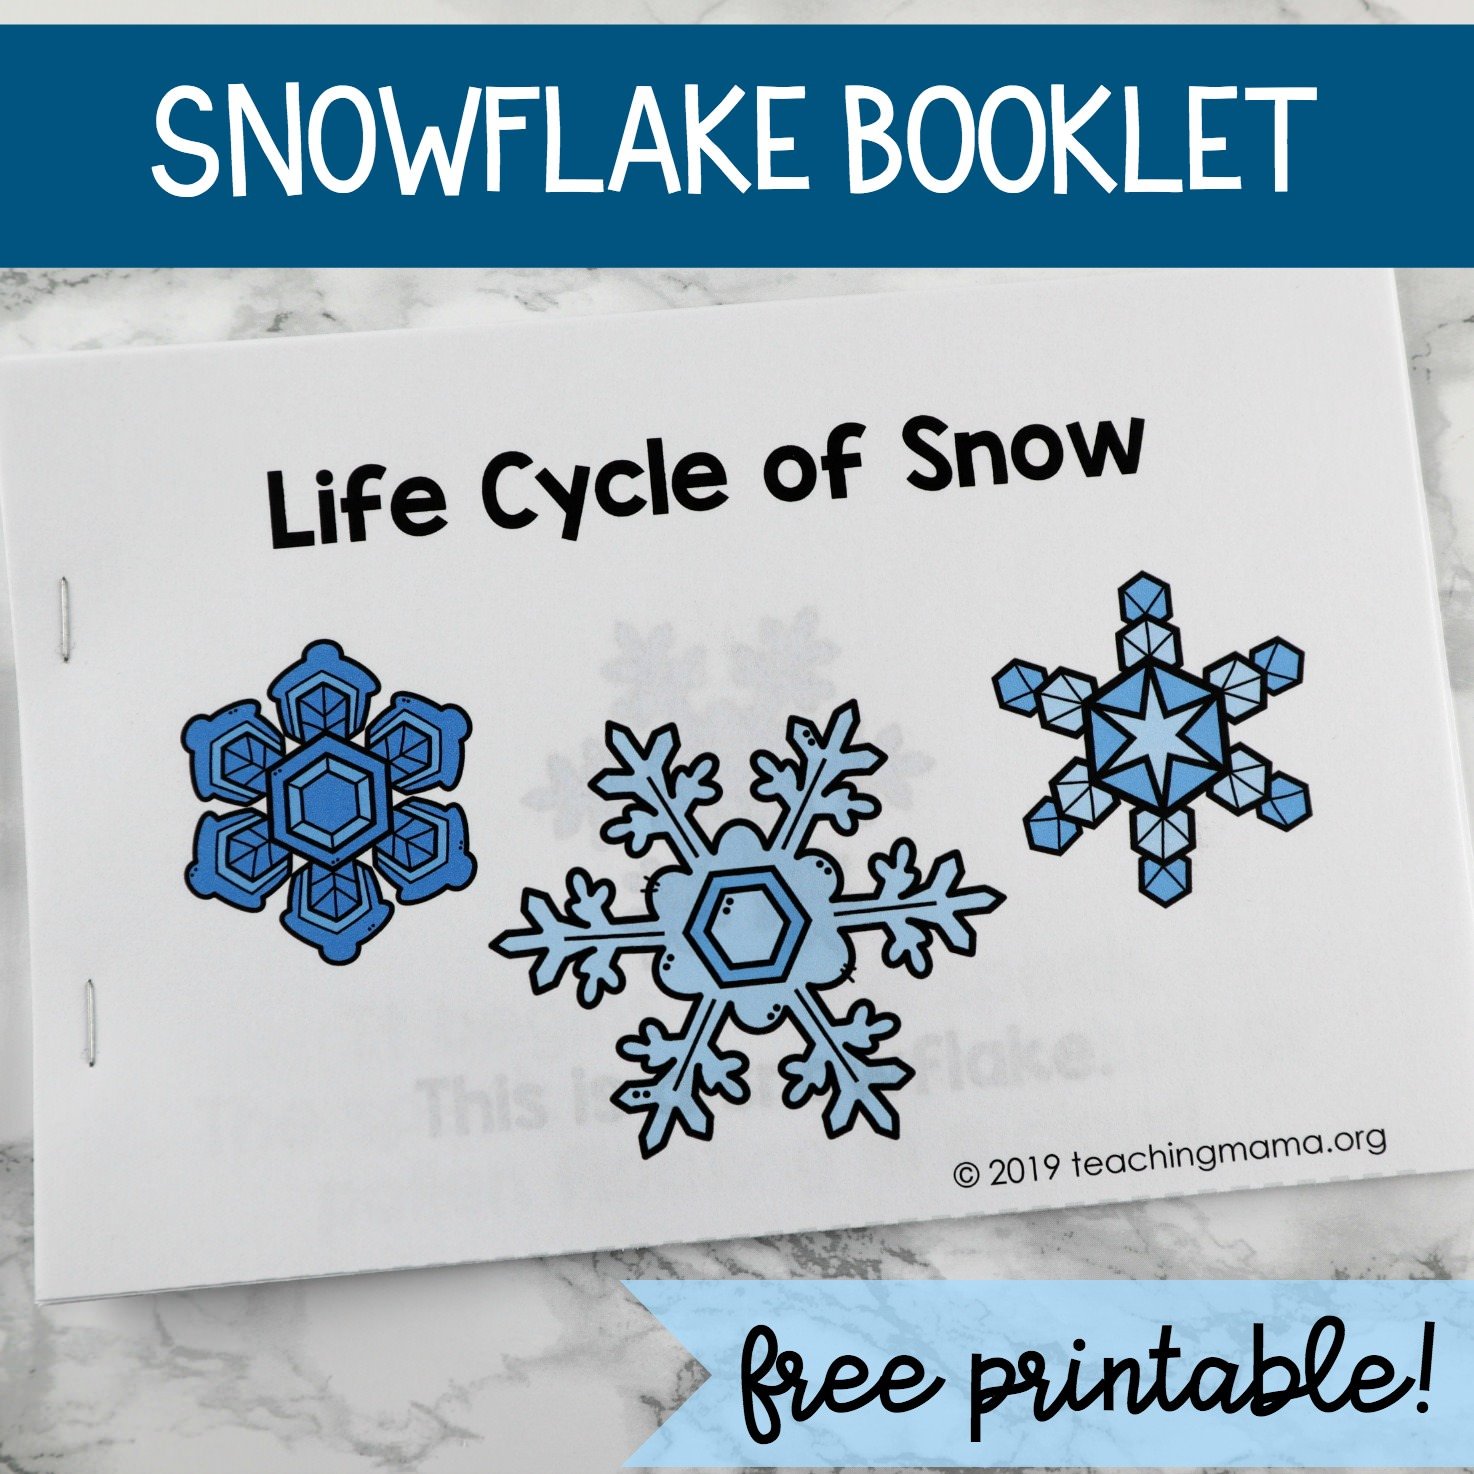 Life Cycle of Snowflakes Booklet